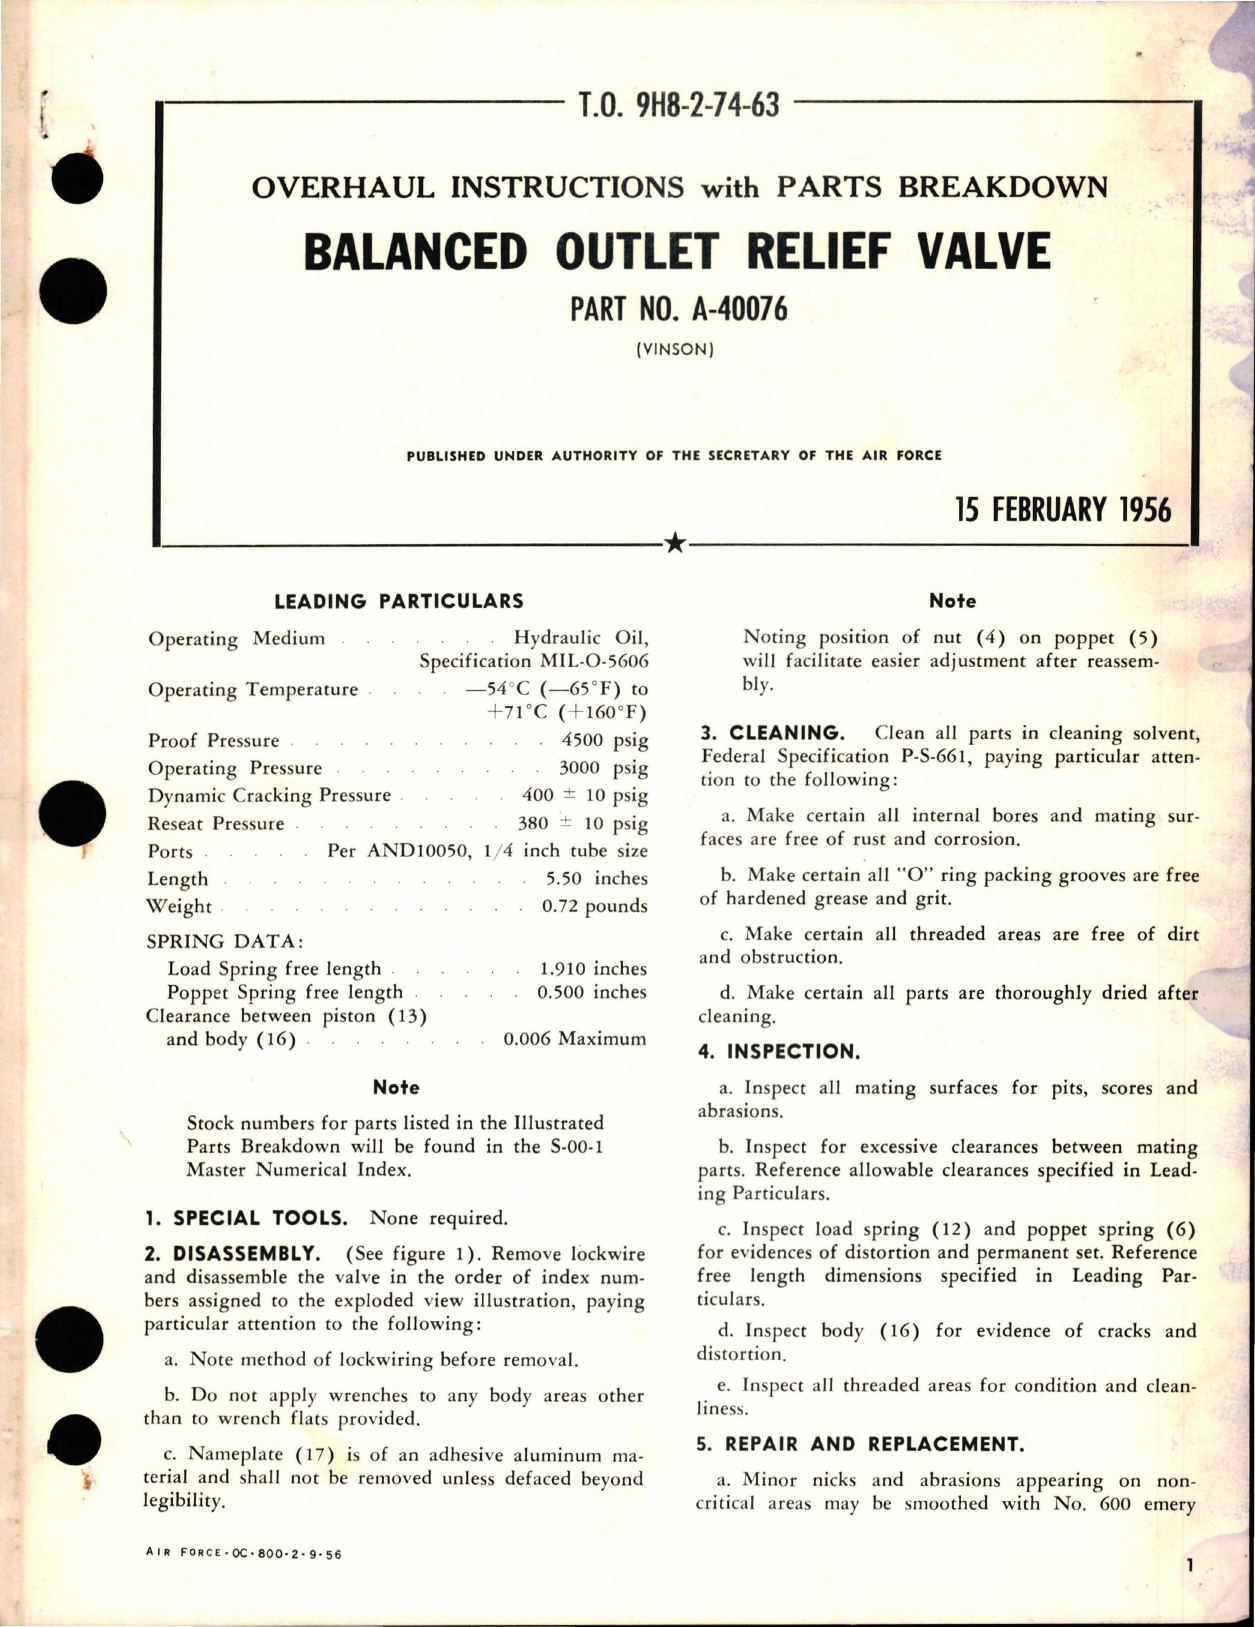 Sample page 1 from AirCorps Library document: Overhaul Instructions with Parts Breakdown for Balanced Outlet Relief Valve - Part A-40076 